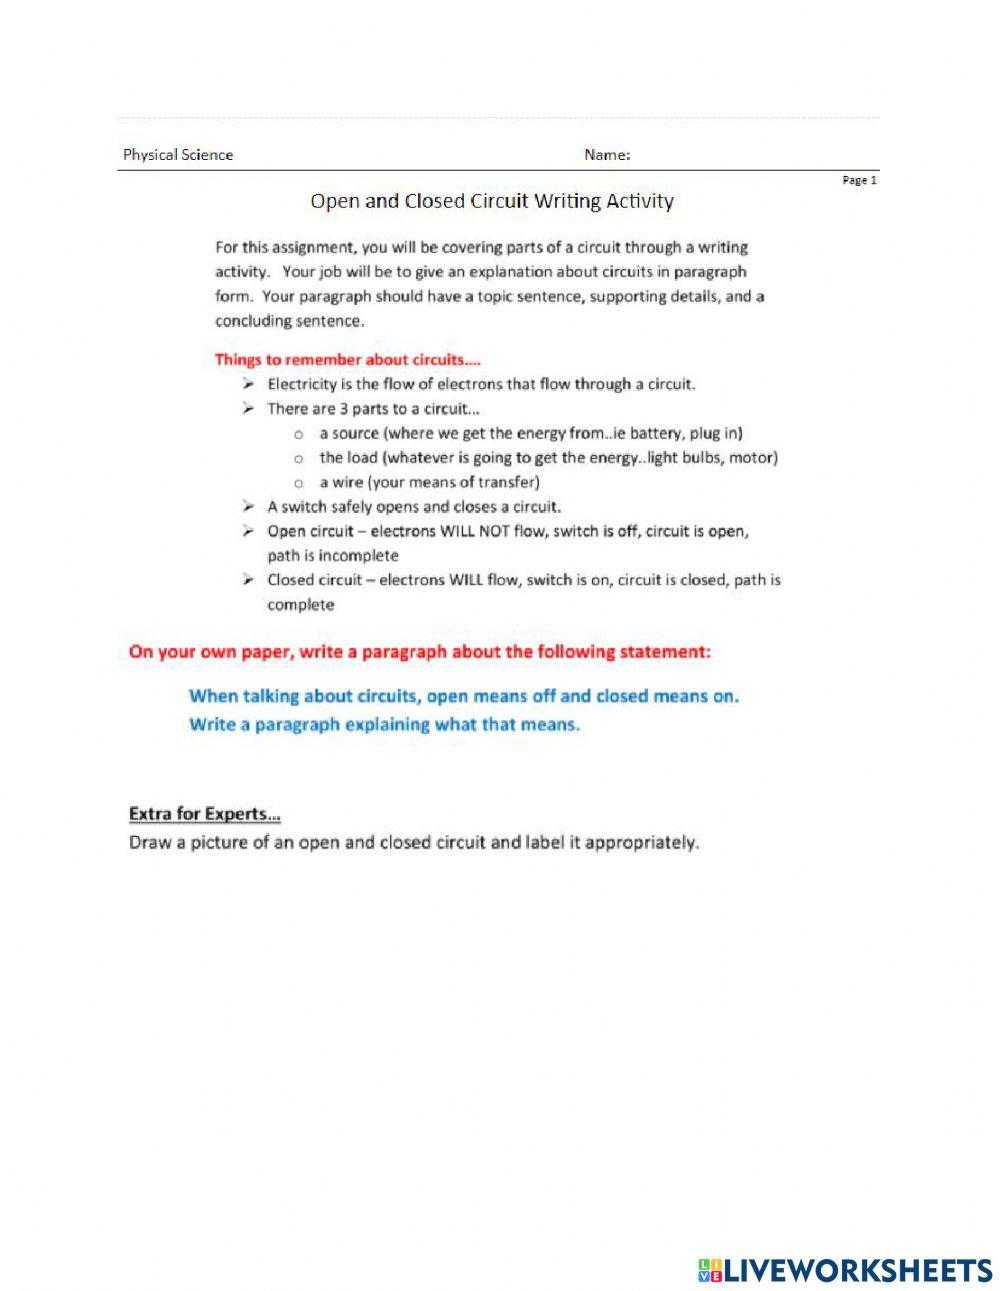 Open and Closed Circuit Writing Activity